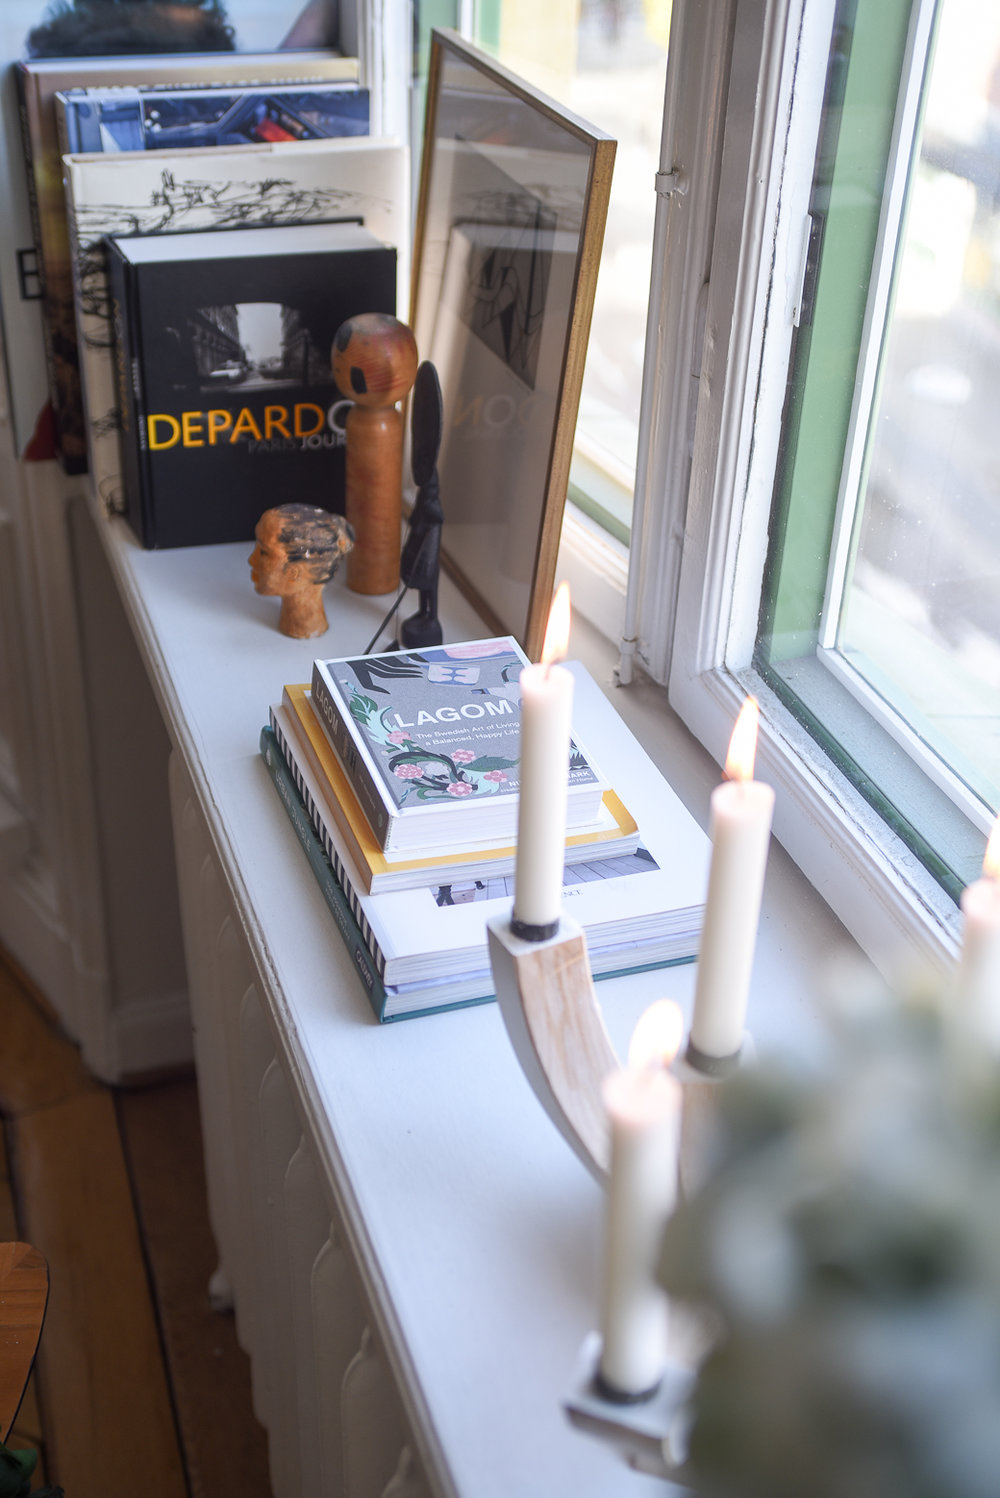 Every day Swedish Design in the home-nordic candleholder + lagom.jpg